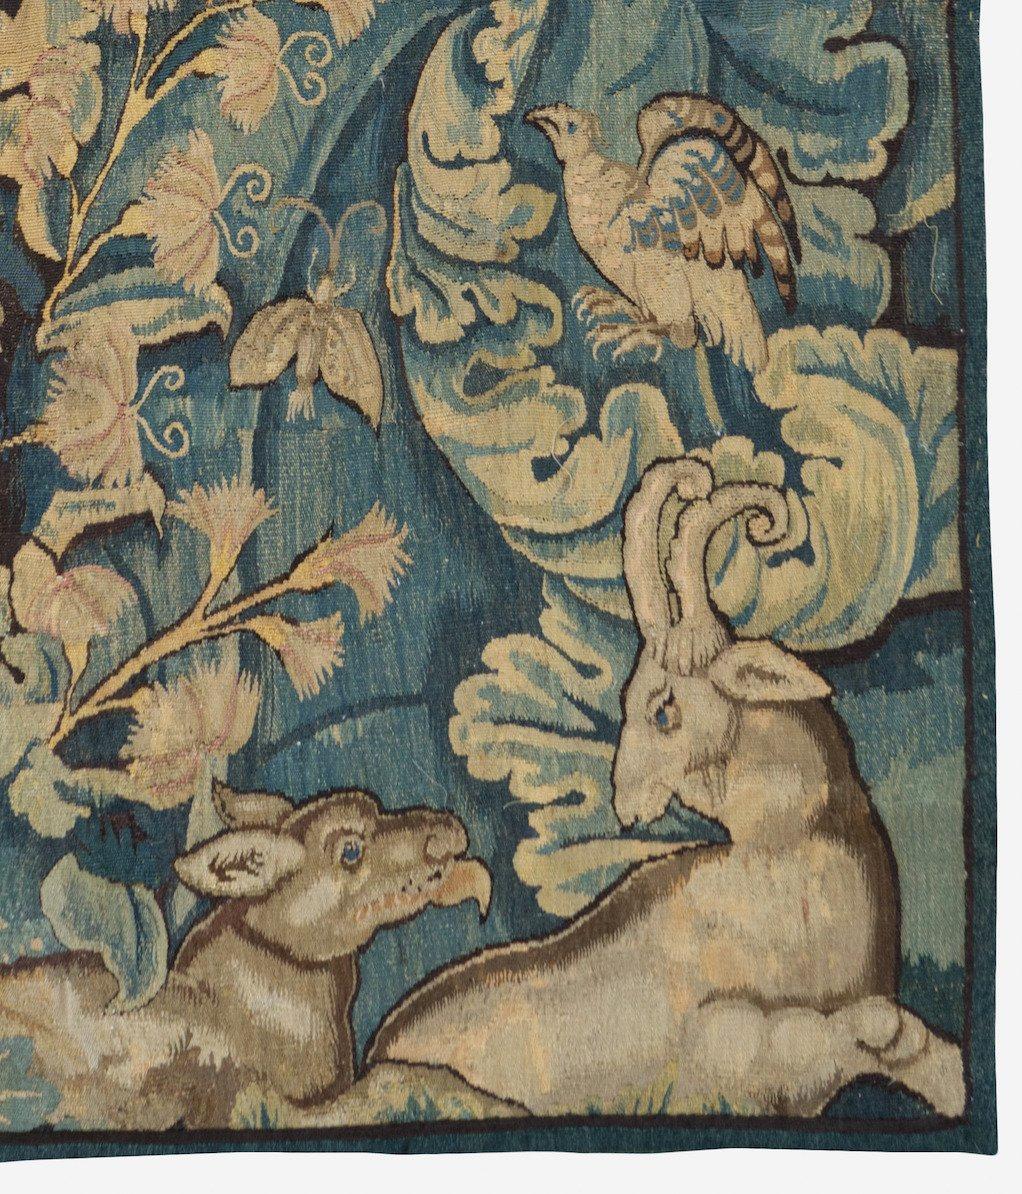 A rare 16th century Flemish Verdure Feuilles de Choux tapestry. 

Feuilles de Choux (cabbage leaves in French) tapestries include large leaves in an overall, often wild motif with animals of the hunt or exotic creatures admired for their beauty and